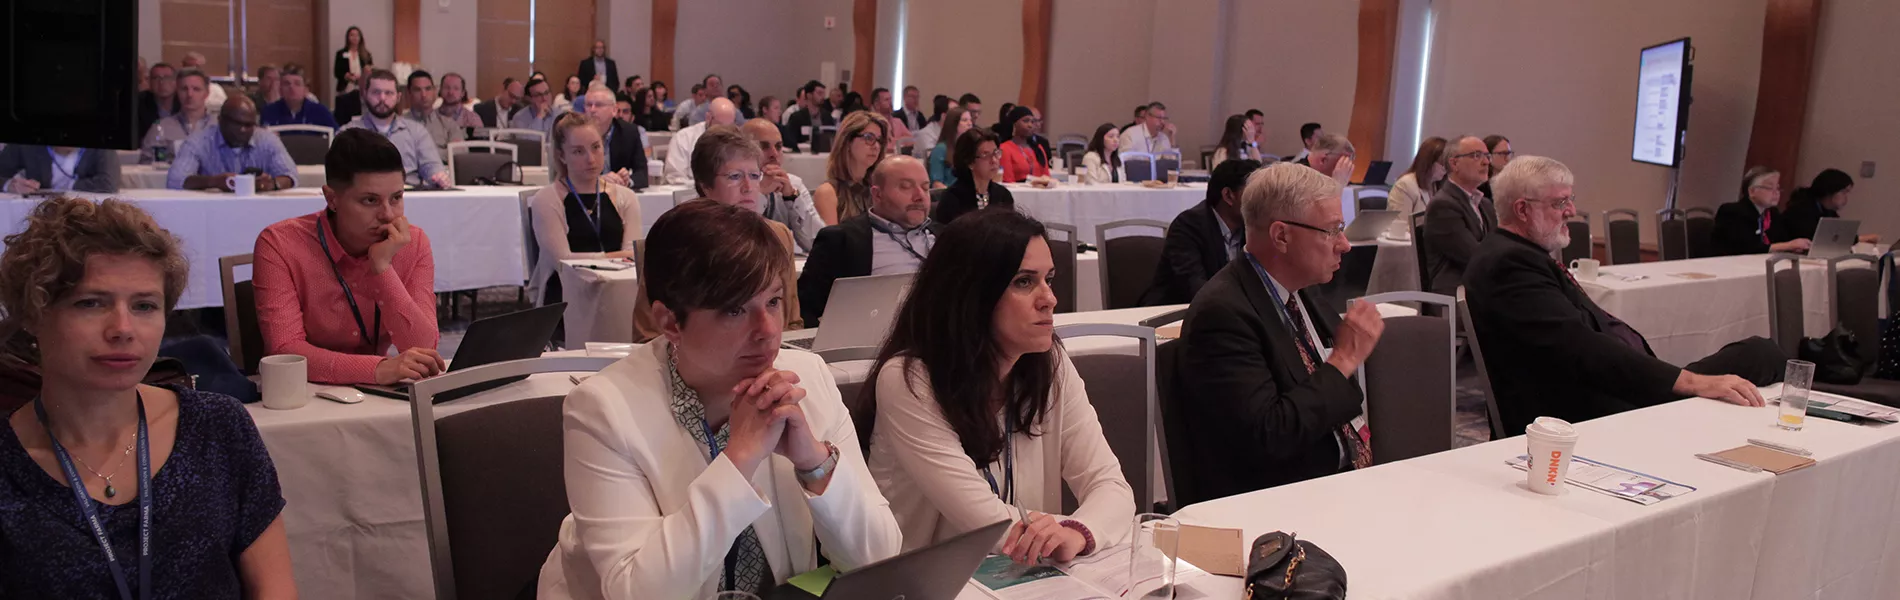 2019 ISPE Biopharmaceutical Manufacturing Conference